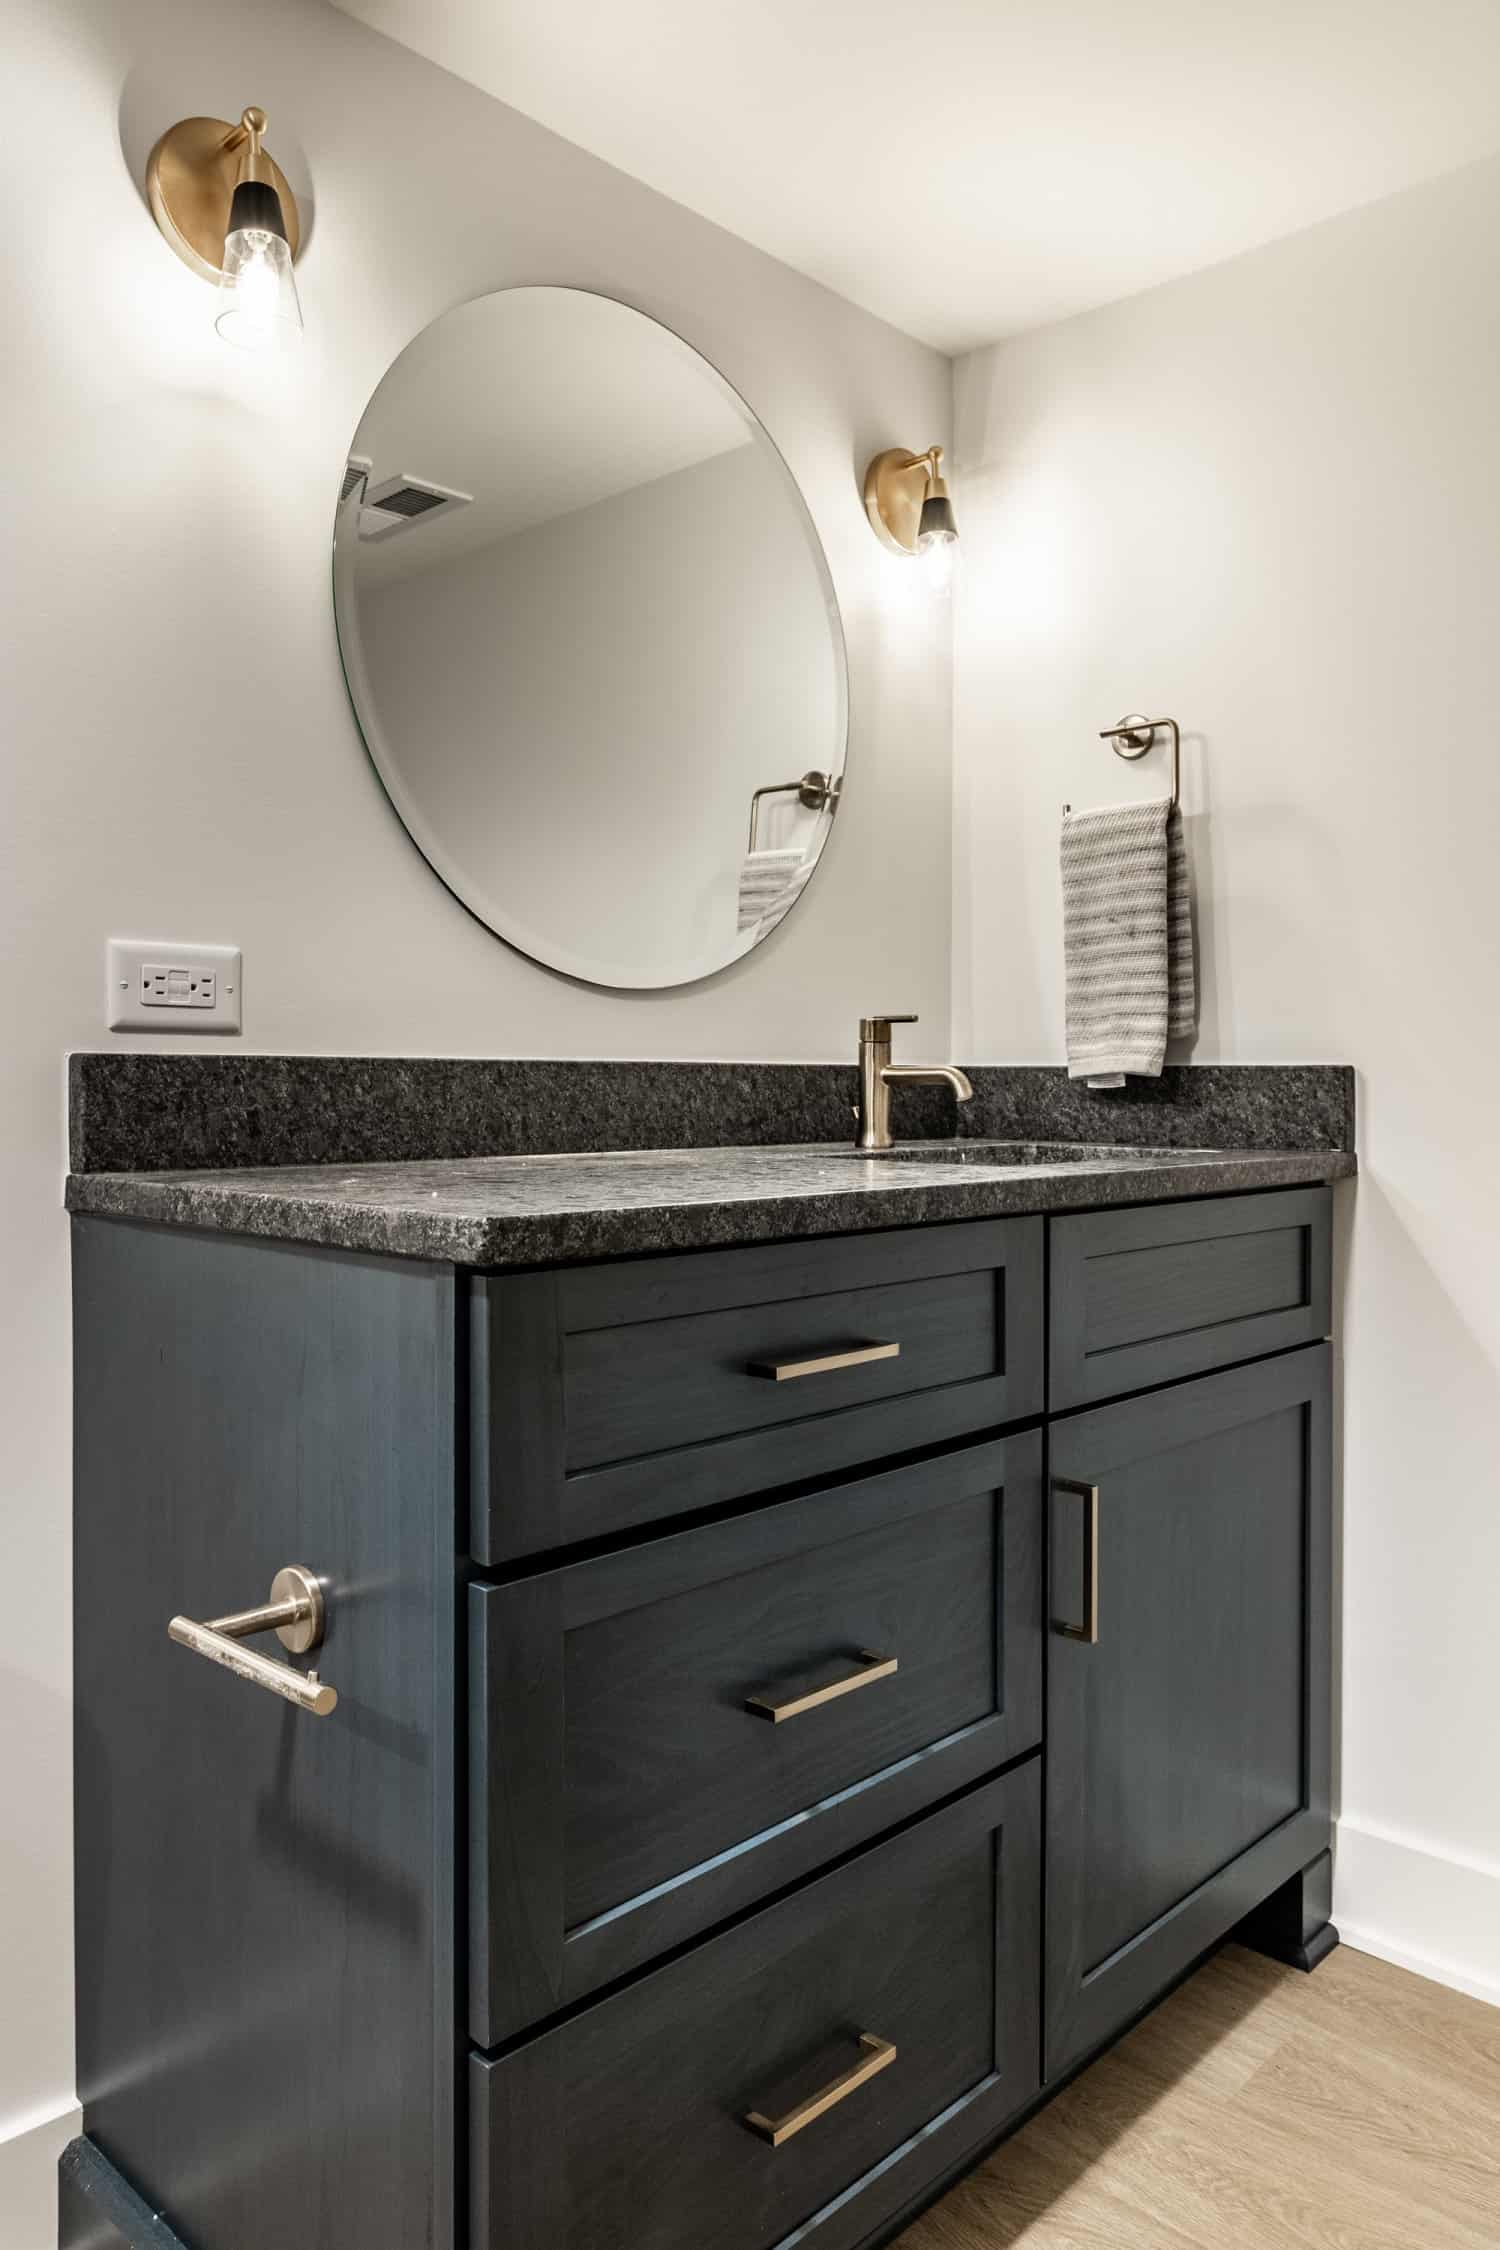 Nicholas Design Build | Remodel a bathroom with black cabinets and a round mirror.